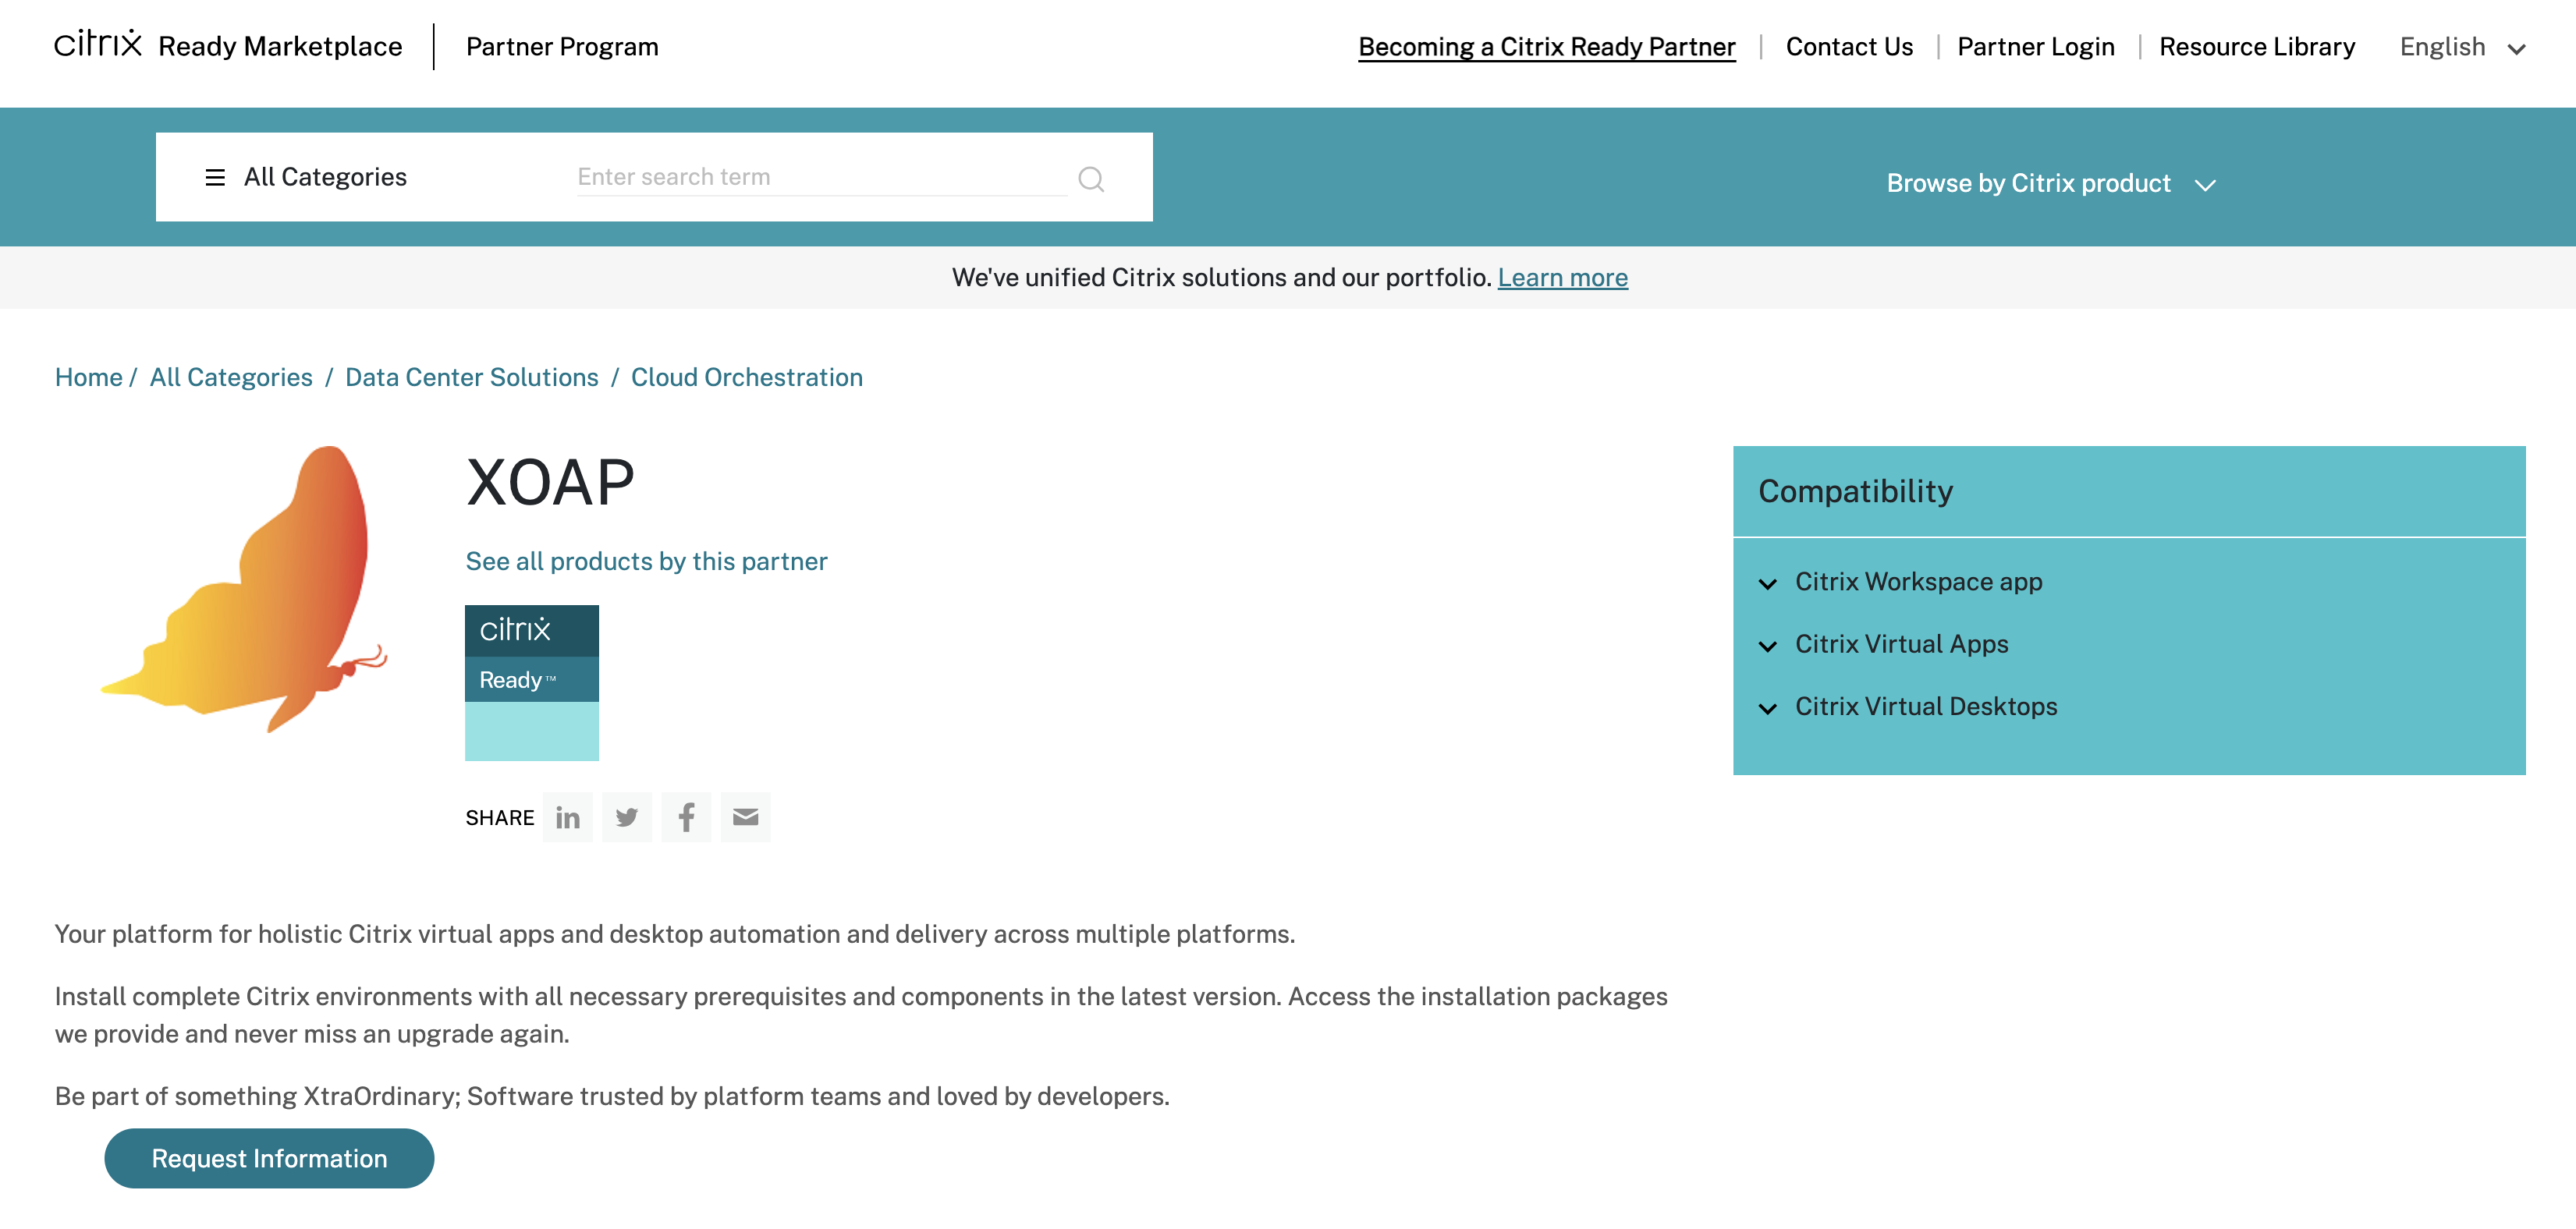 an overview of XOAP on the Citrix Ready Marketplace website